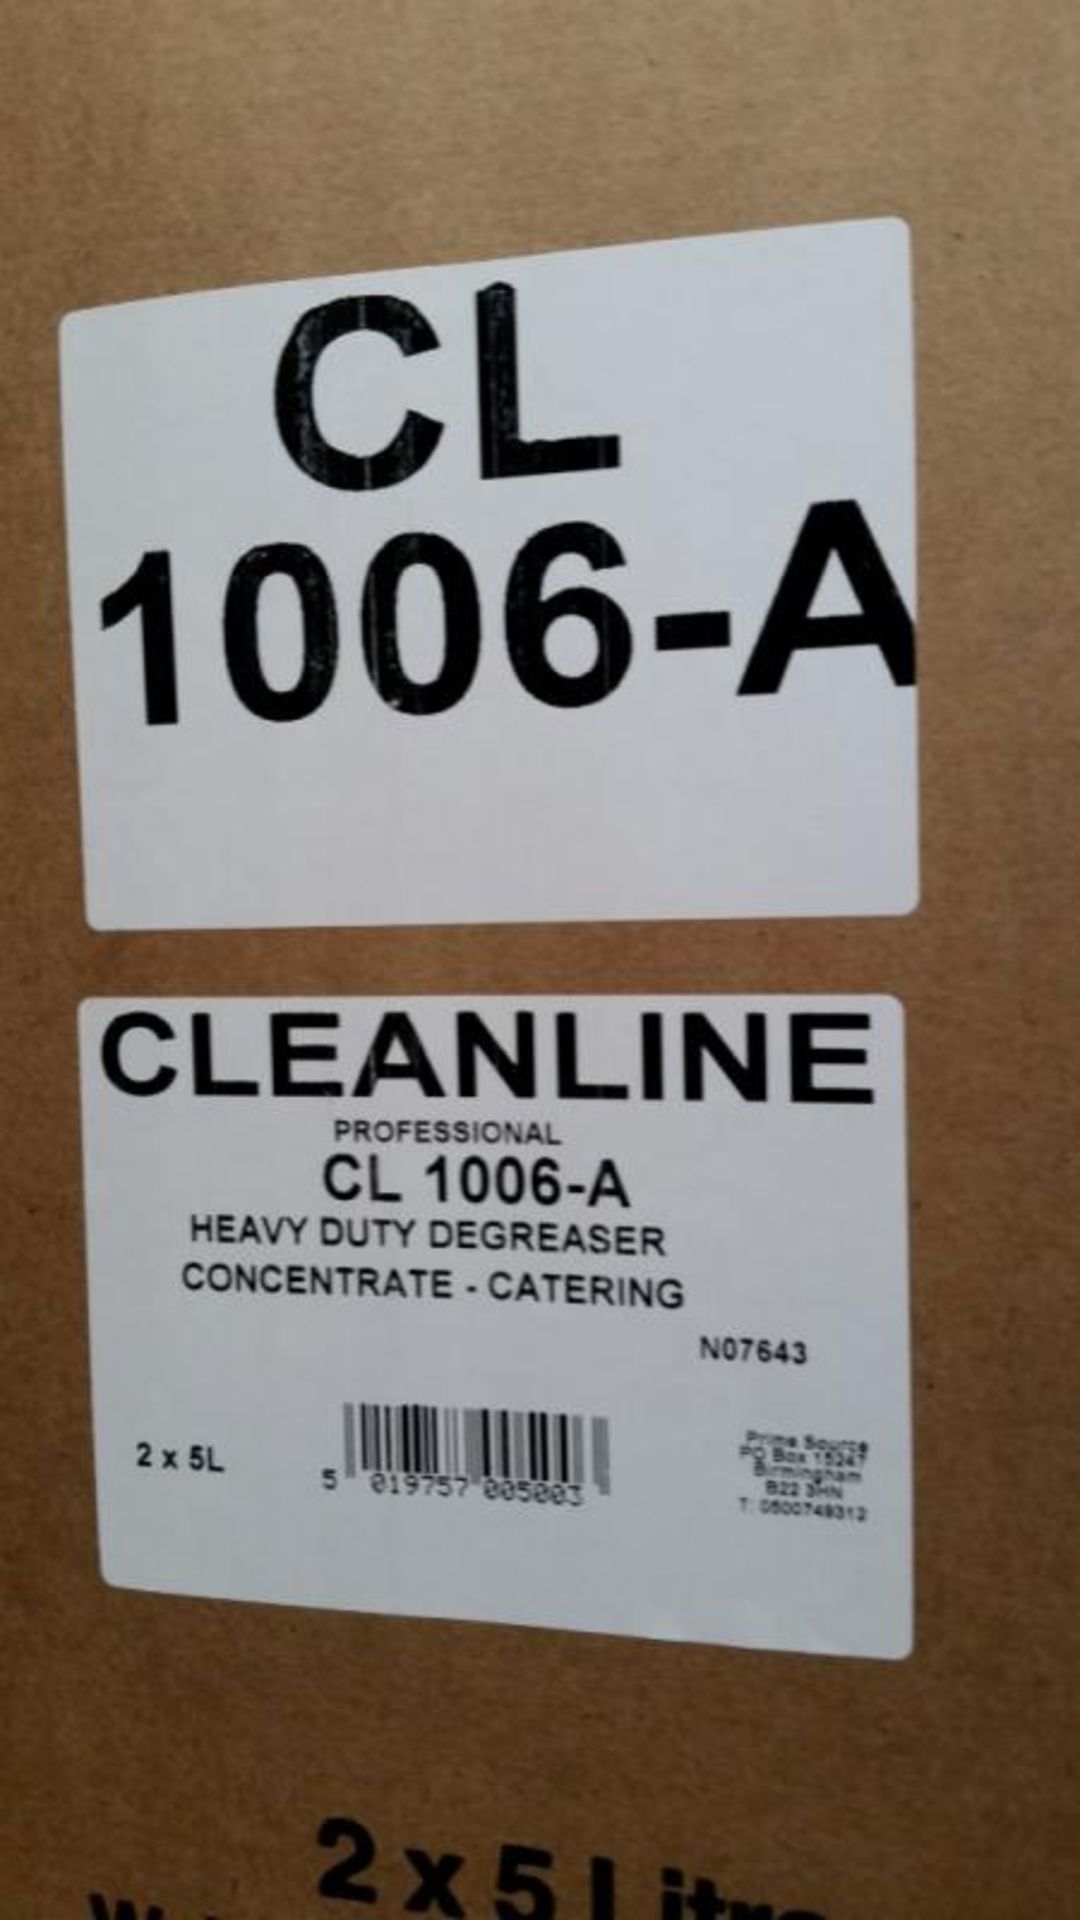 2 x Clean Line Professional 5 Litre Heavy Duty Degreaser Concentrate - Alkaline Cleaner & - Image 3 of 5